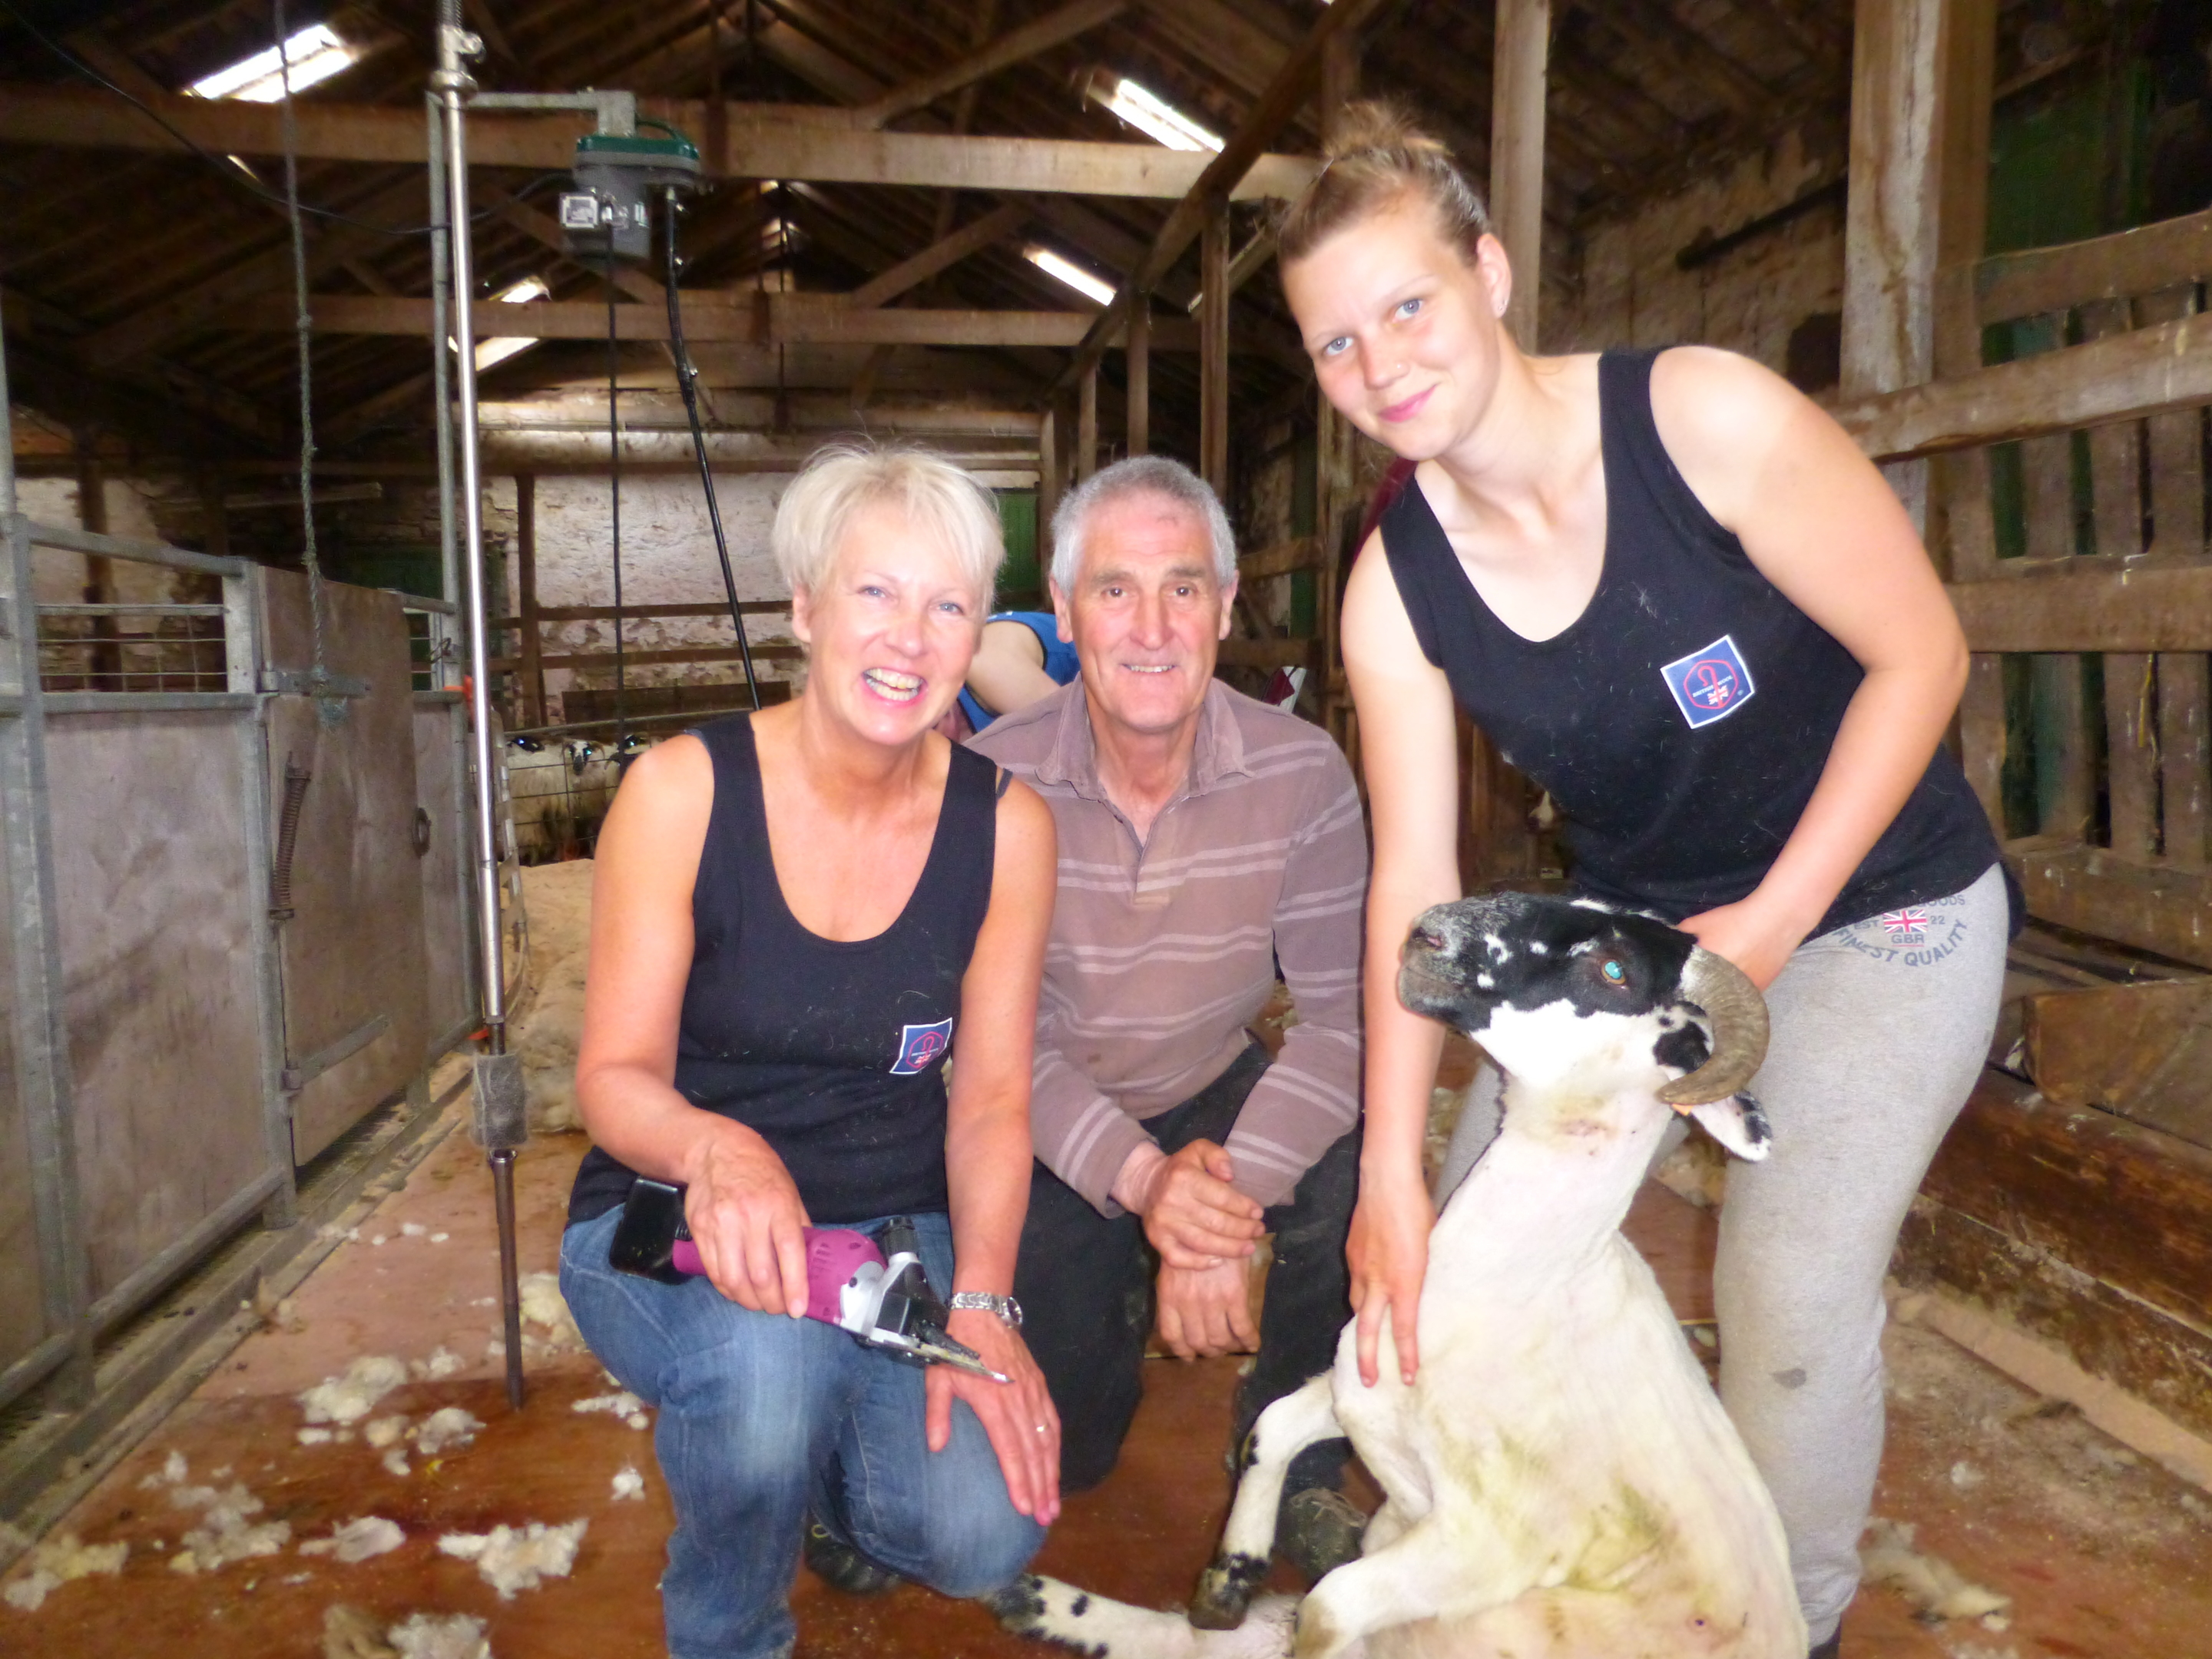 More than 280 students have enrolled on 52 Scottish shearing courses this year